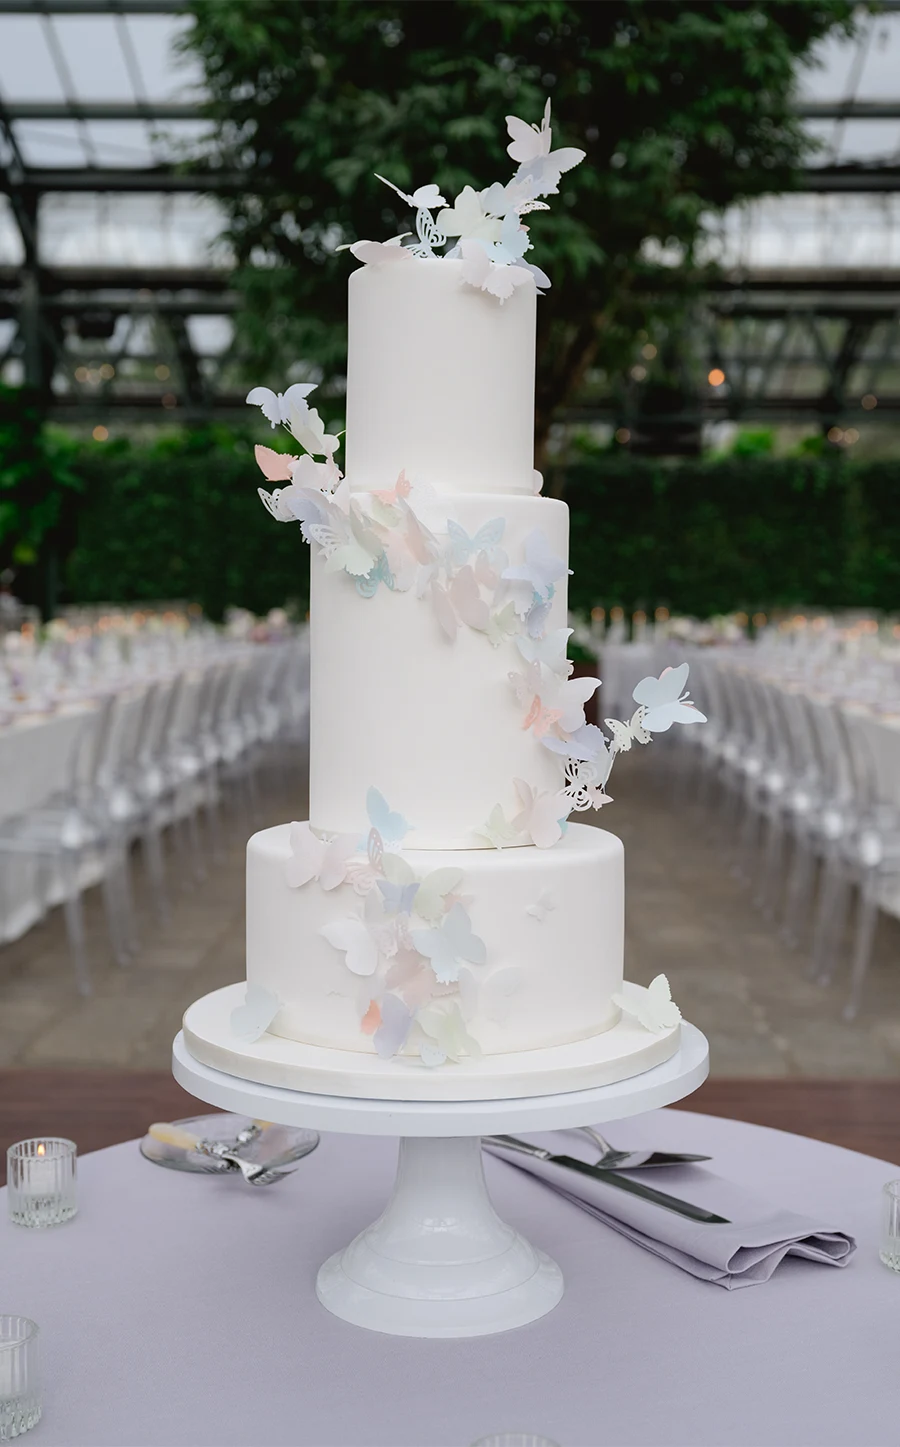 three-tier wedding cake with pastel butterfly decorations